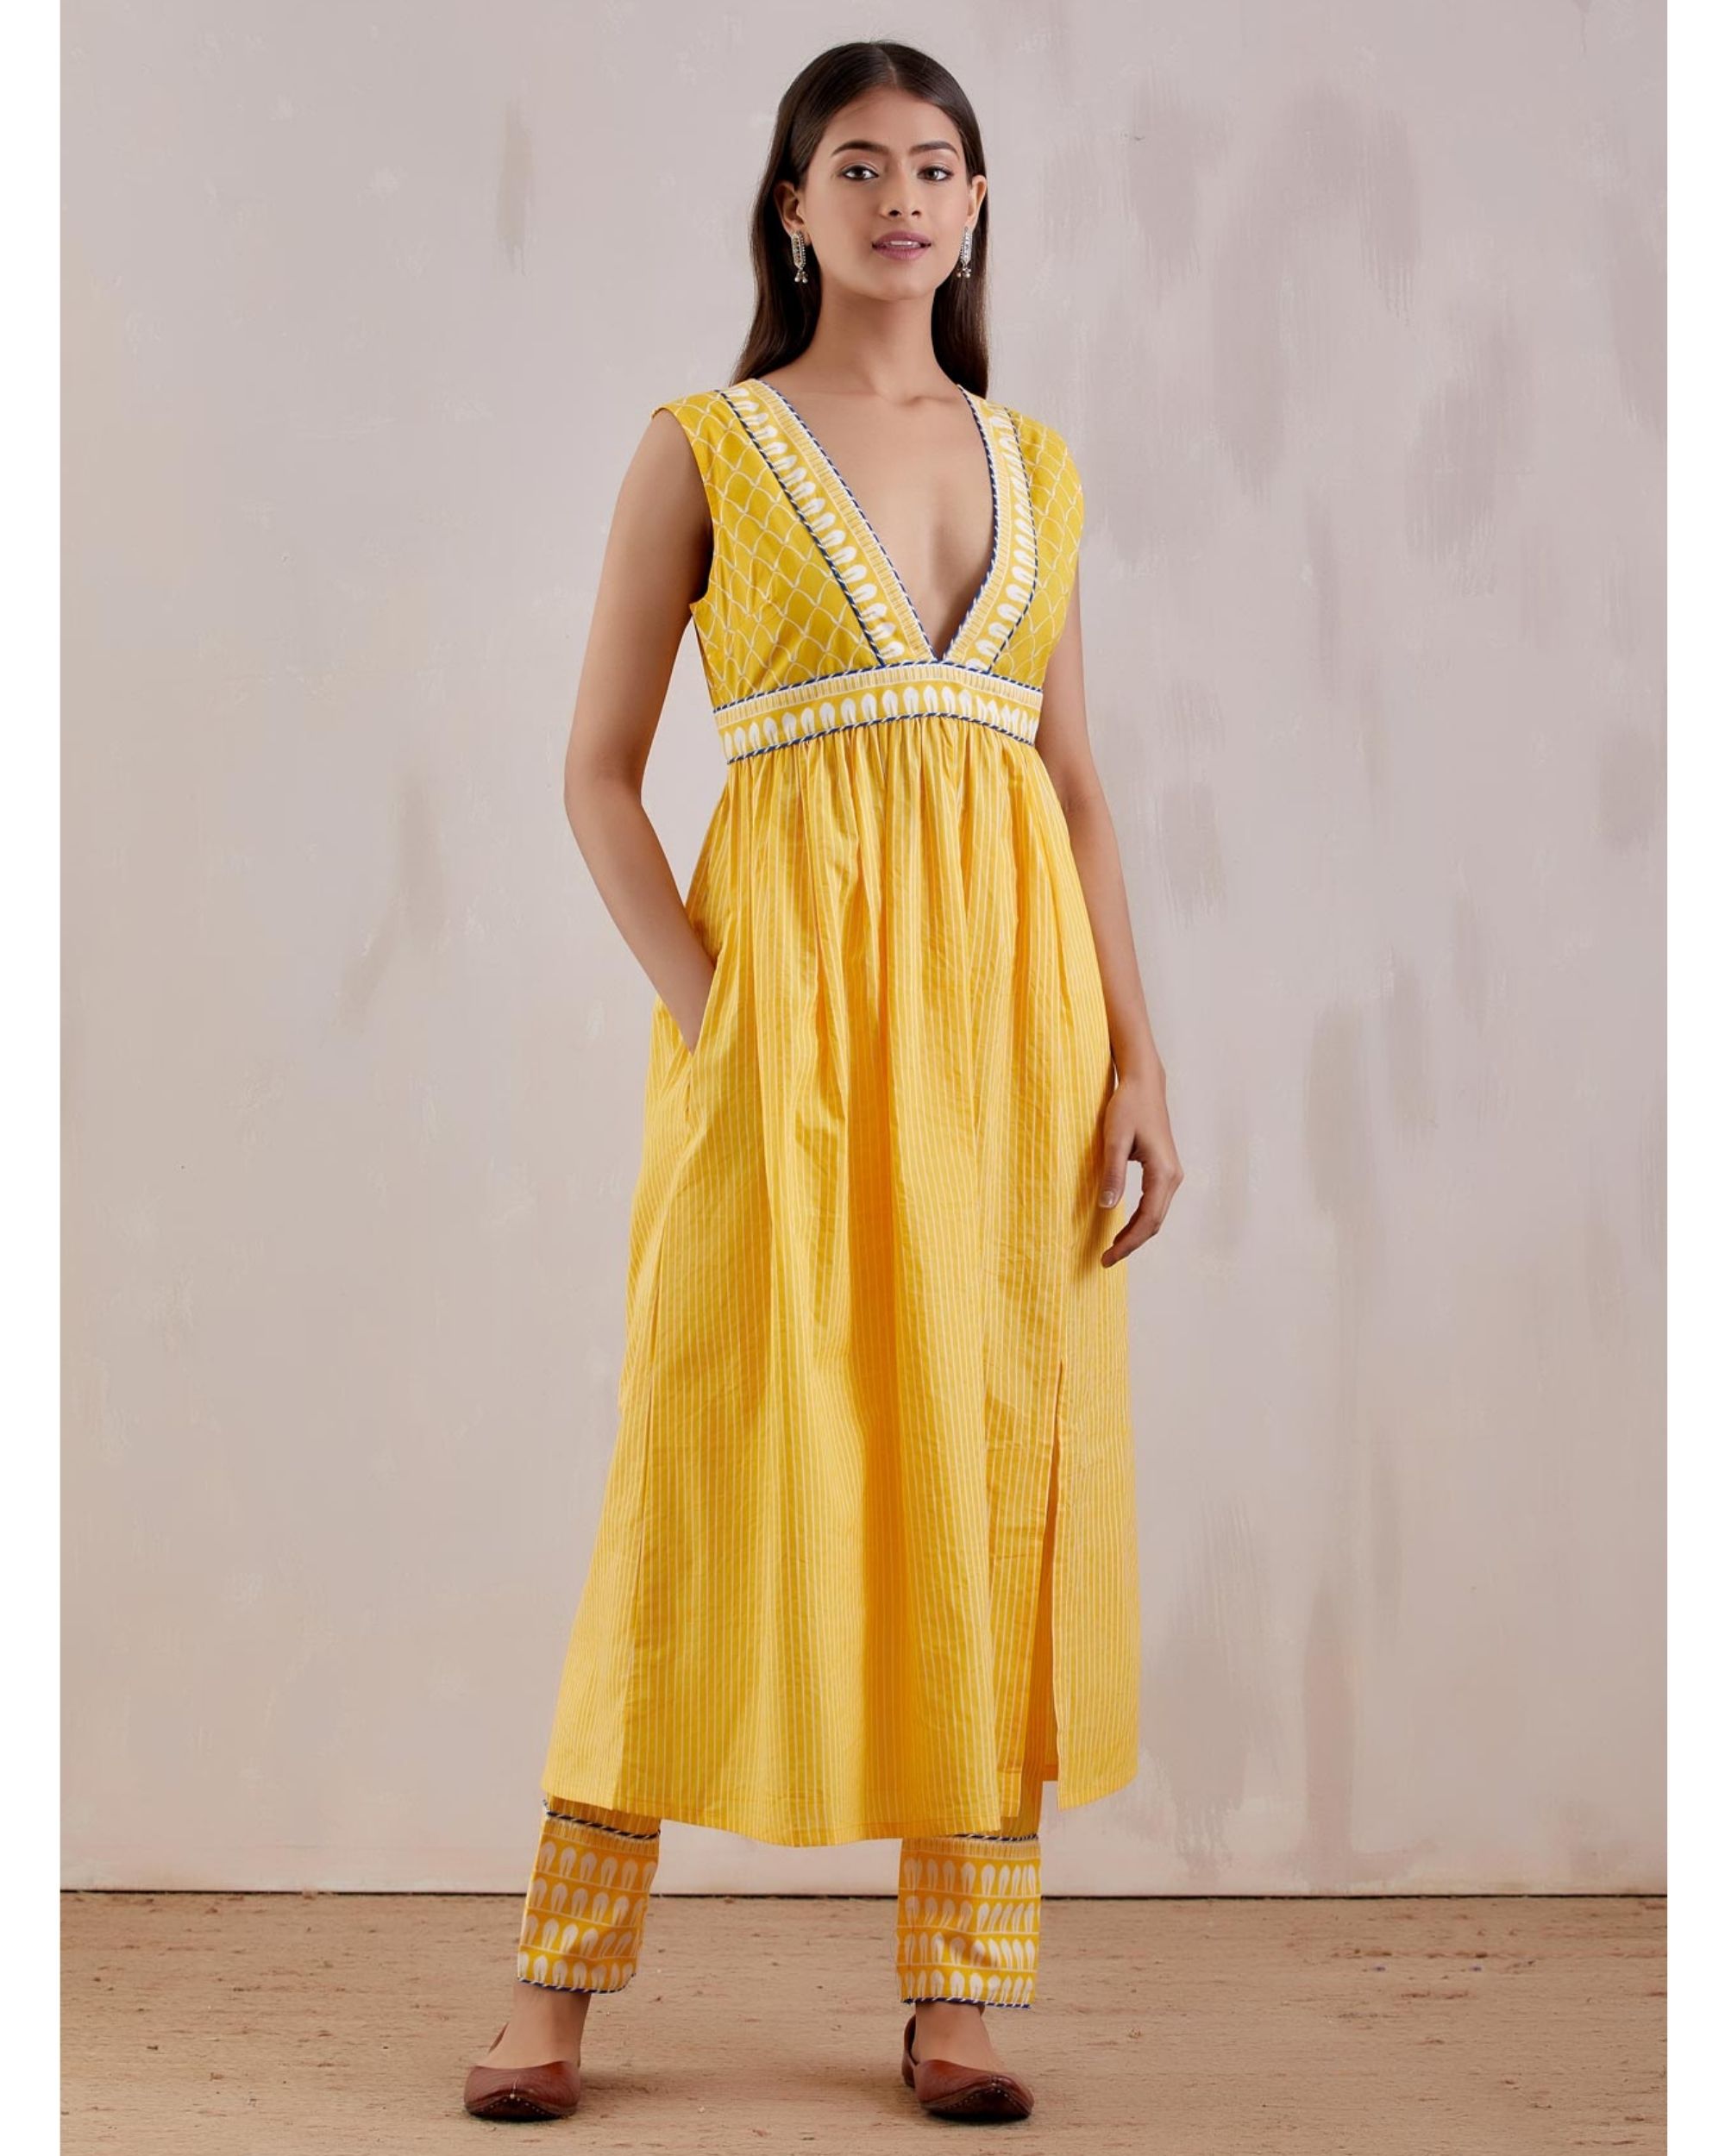 Yellow and White Beach Wedding Color Combos 2024, Yellow Bridesmaid Dresses,  White Bridal Gown - ColorsBridesmaid